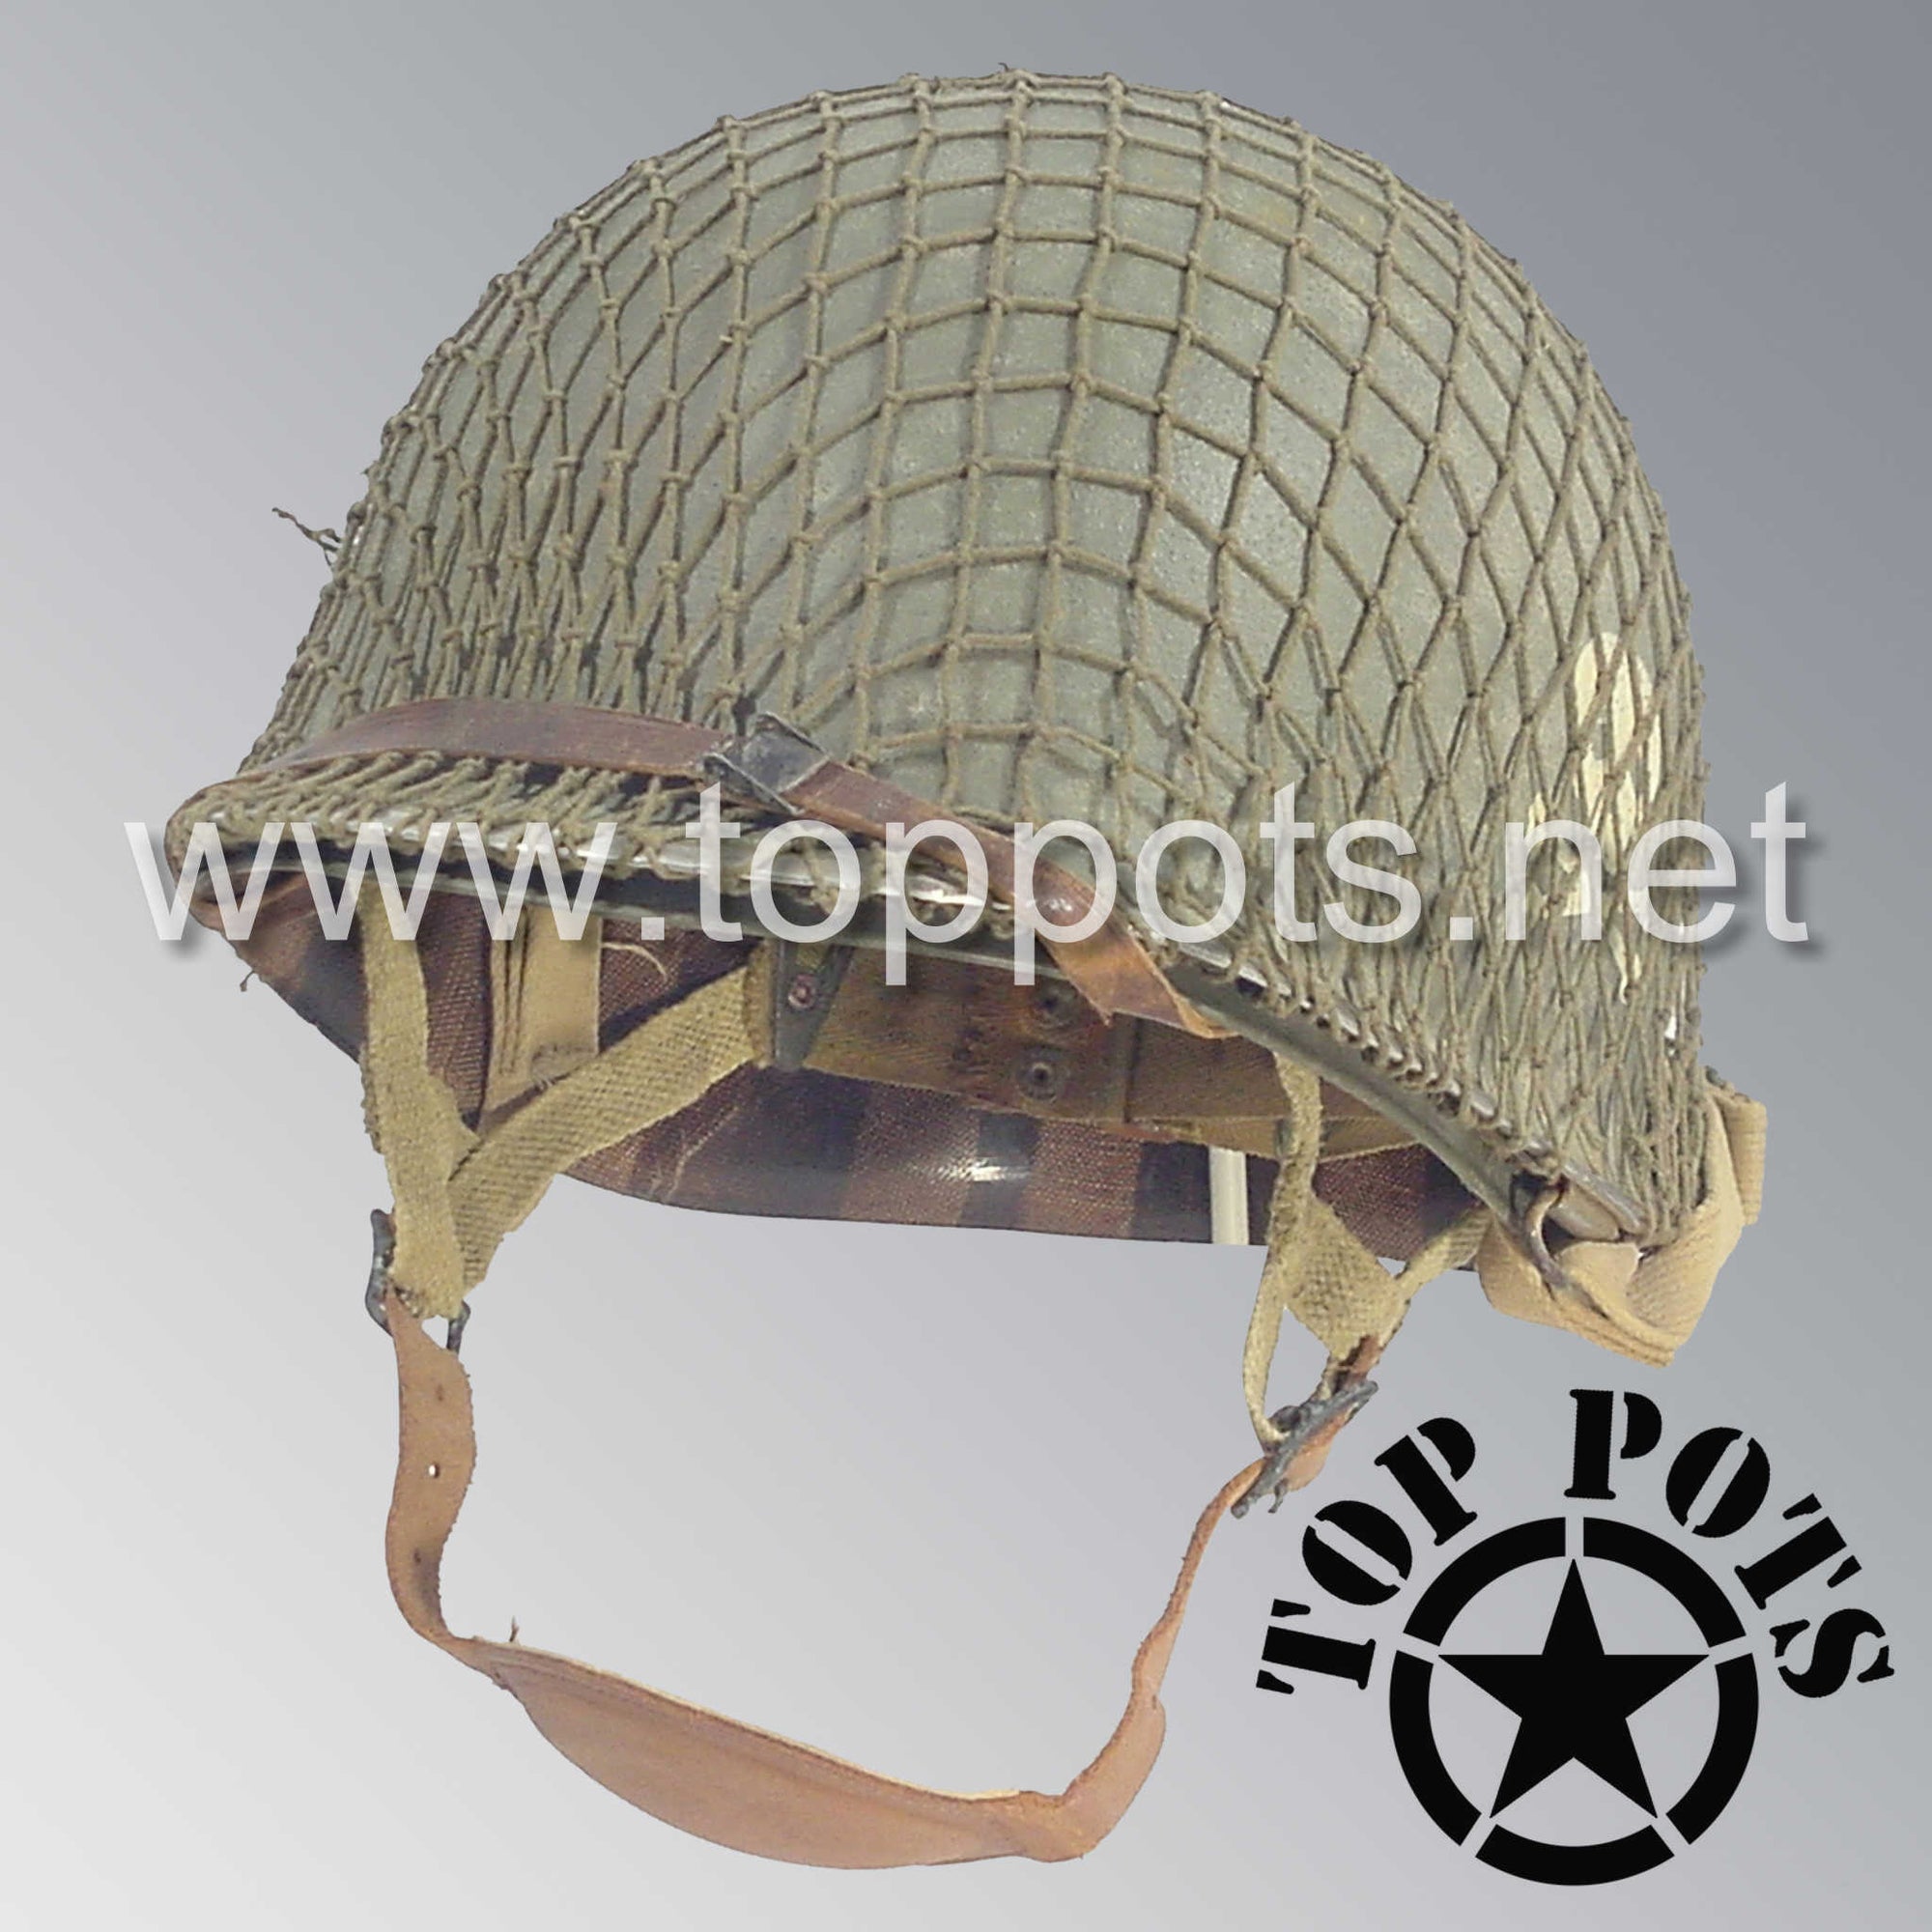 WWII US Army Aged Original M1C Paratrooper Airborne Helmet Swivel Bale Shell and Liner with 504th PIR NCO Emblem with Net